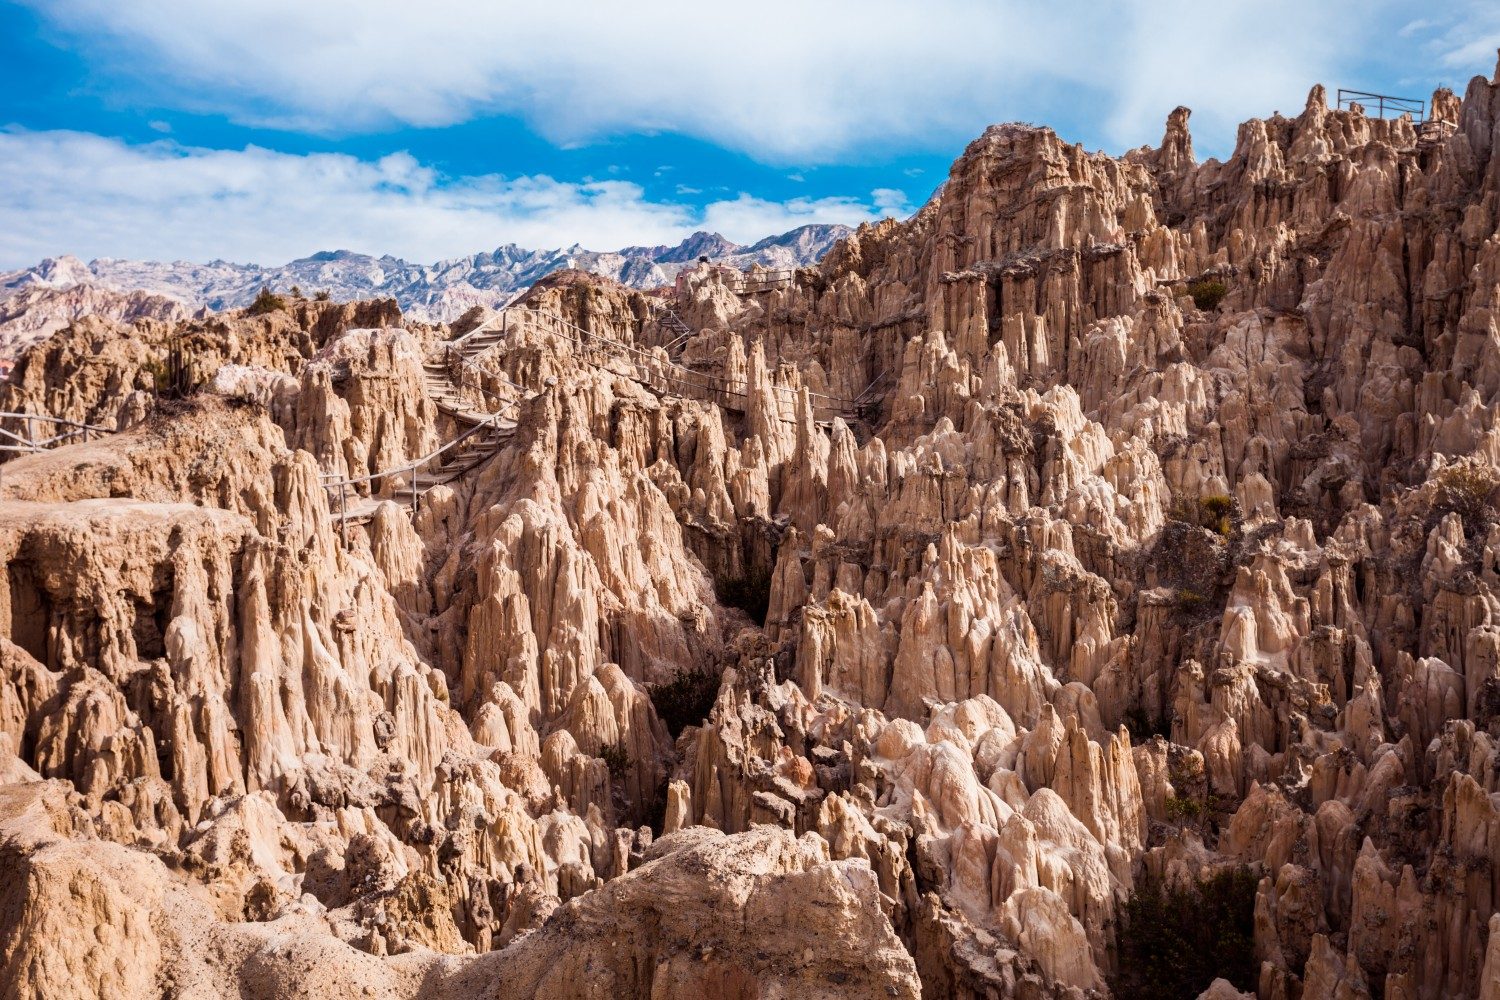 The Valle de La Luna in Bolivia is a Stunning Sight. Here's what you must see on your trip to Bolivia